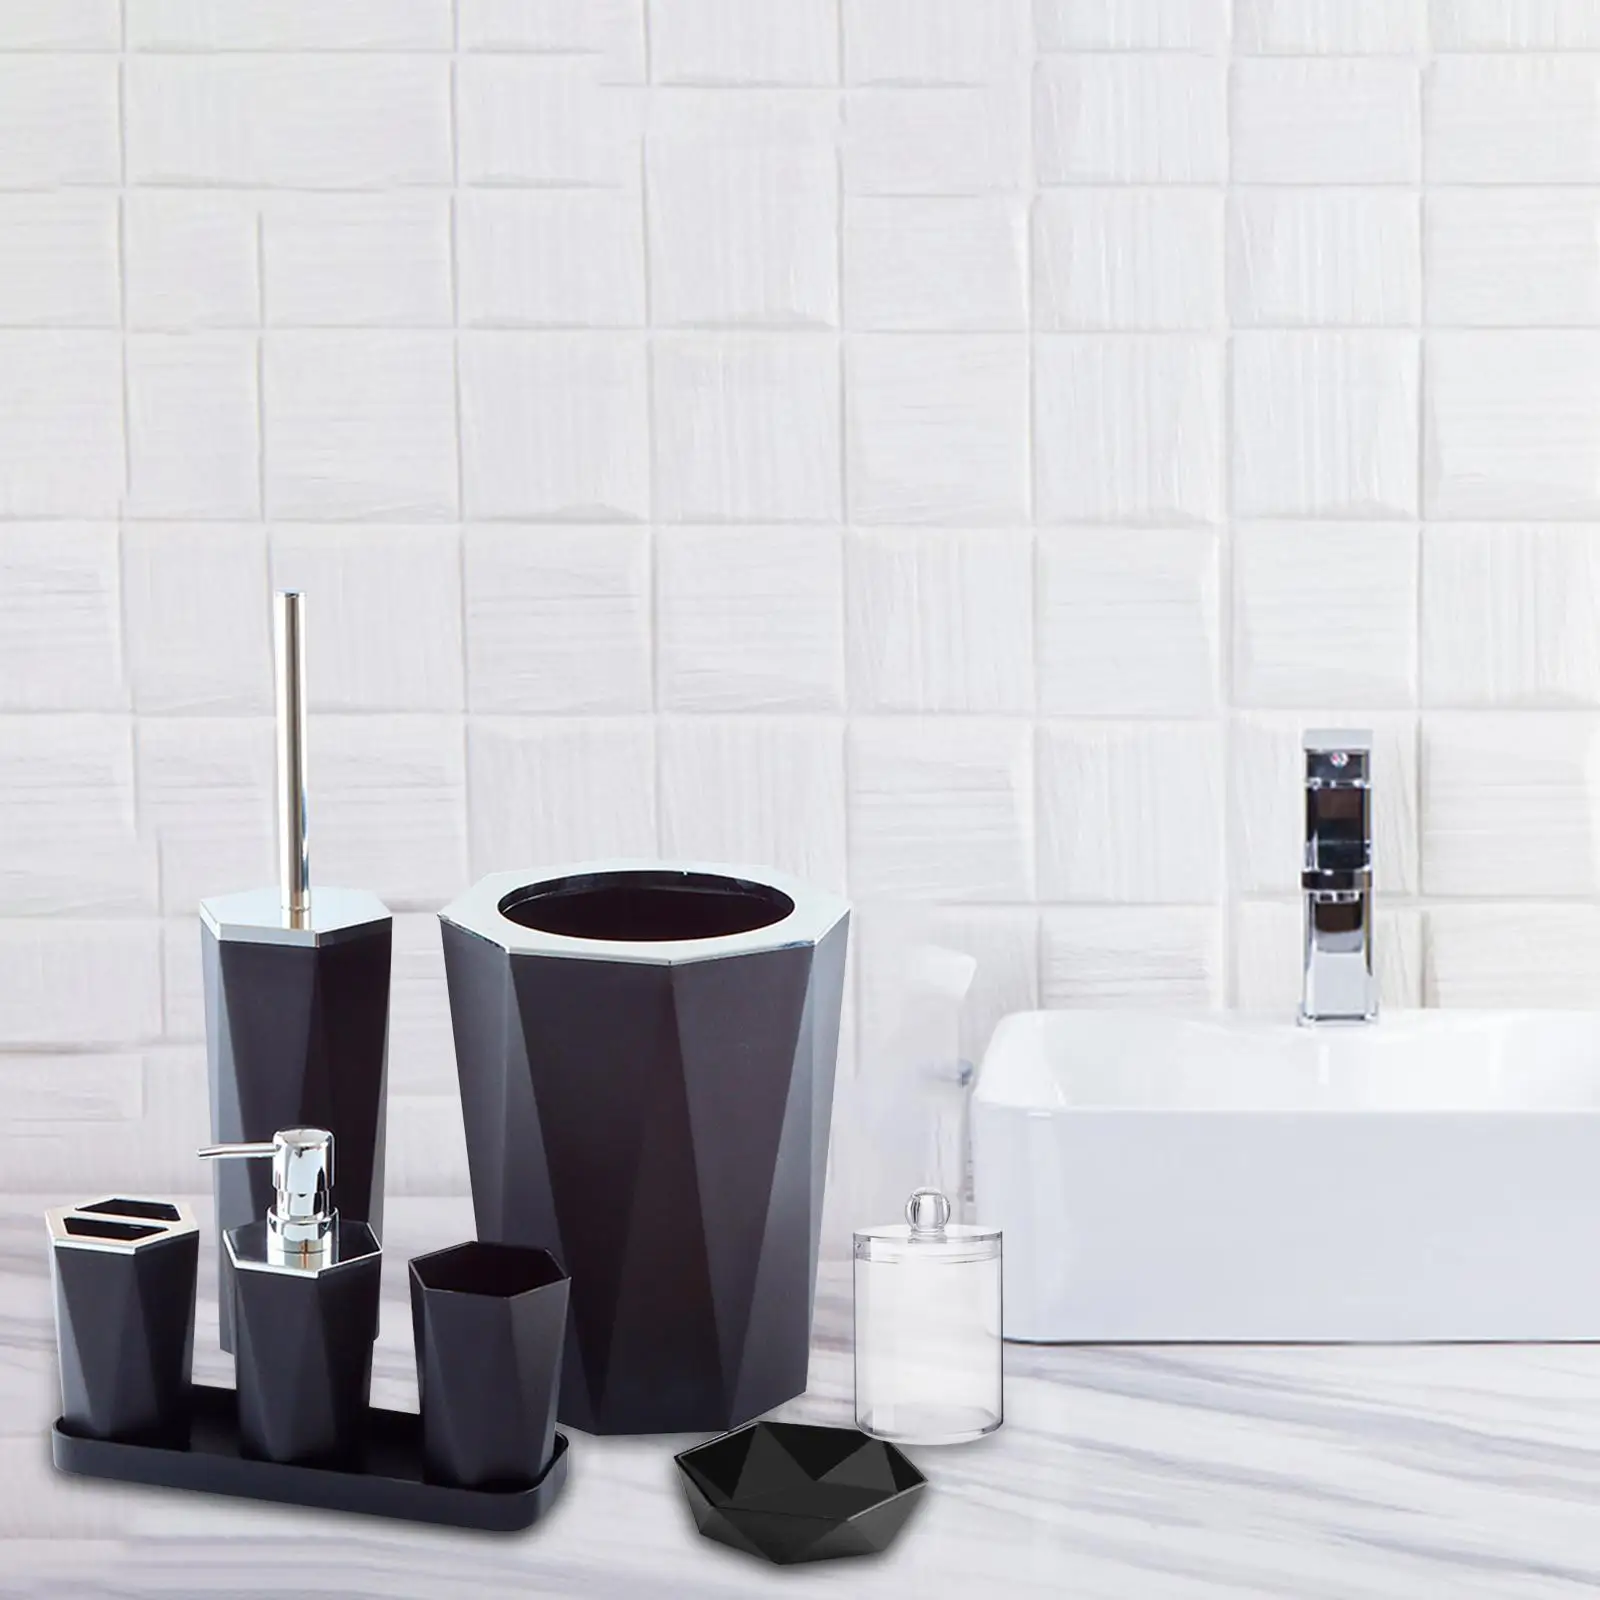 7Pcs Bathroom Accessories Set Toilet Brush Toothbrush Cup and Soap Dispenser and Soap Dish and Tumbler for Countertop Toilet